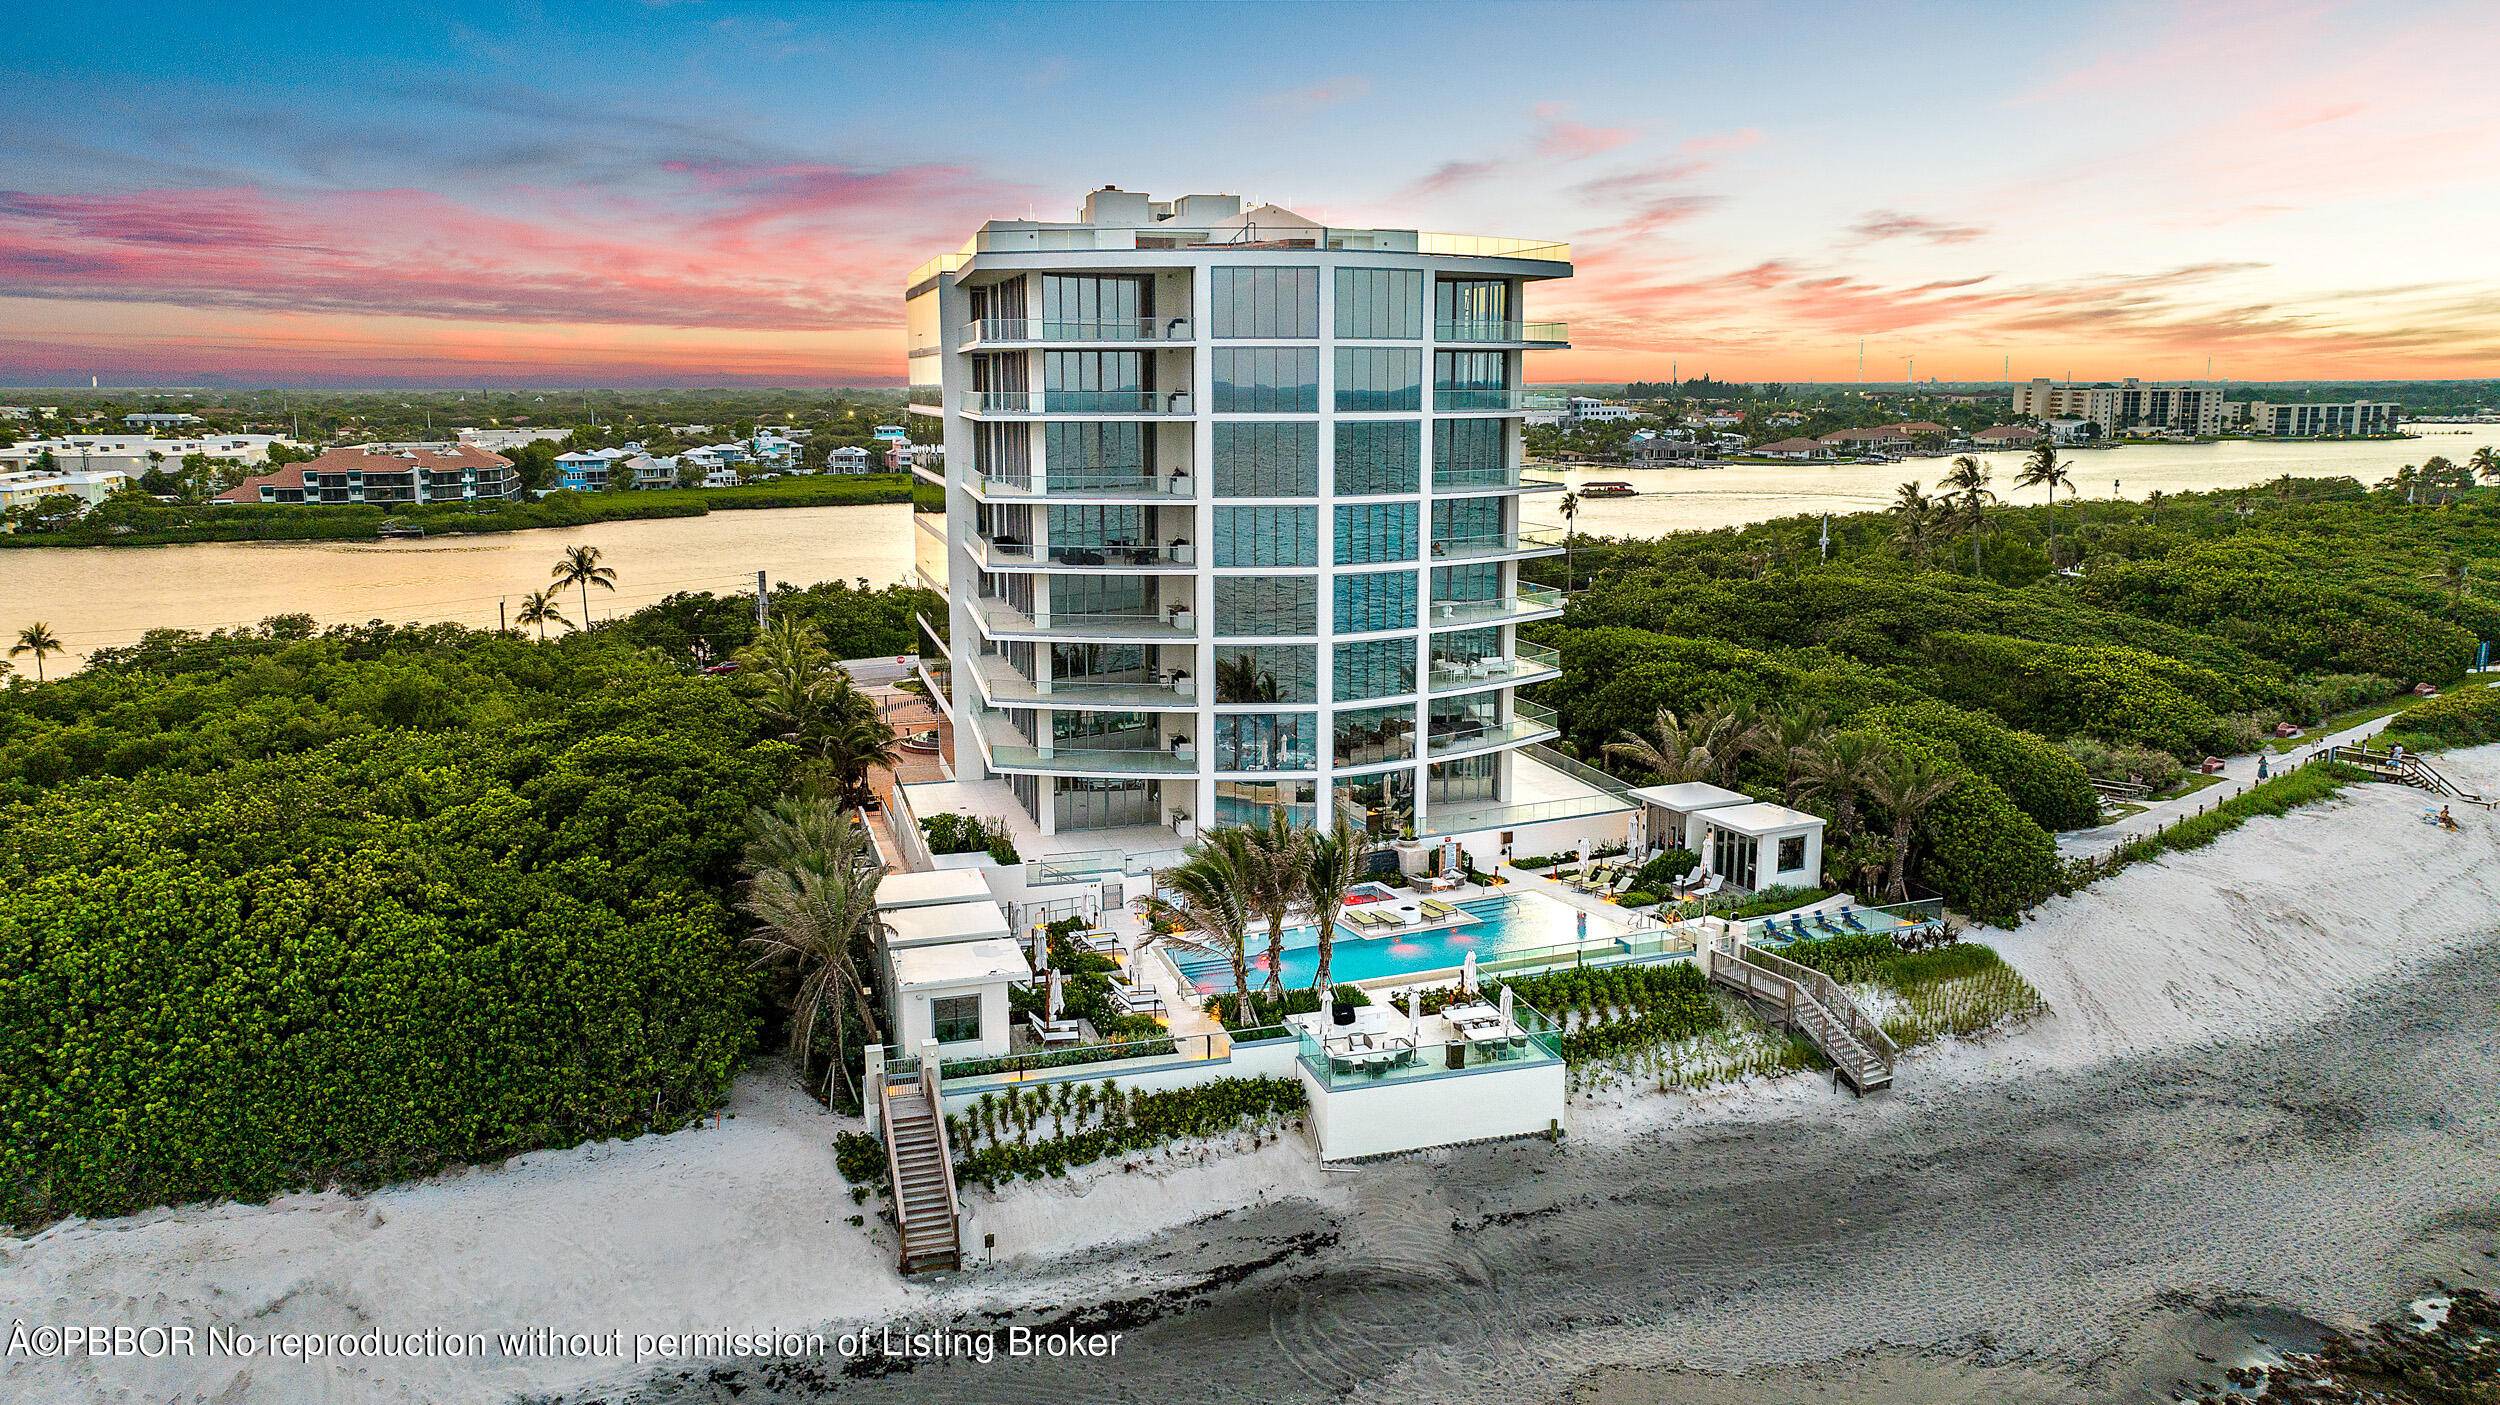 2022 new construction condominium nestled between two parks, preserves, with unobstructed views of the Atlantic Ocean and Intracoastal waterway.